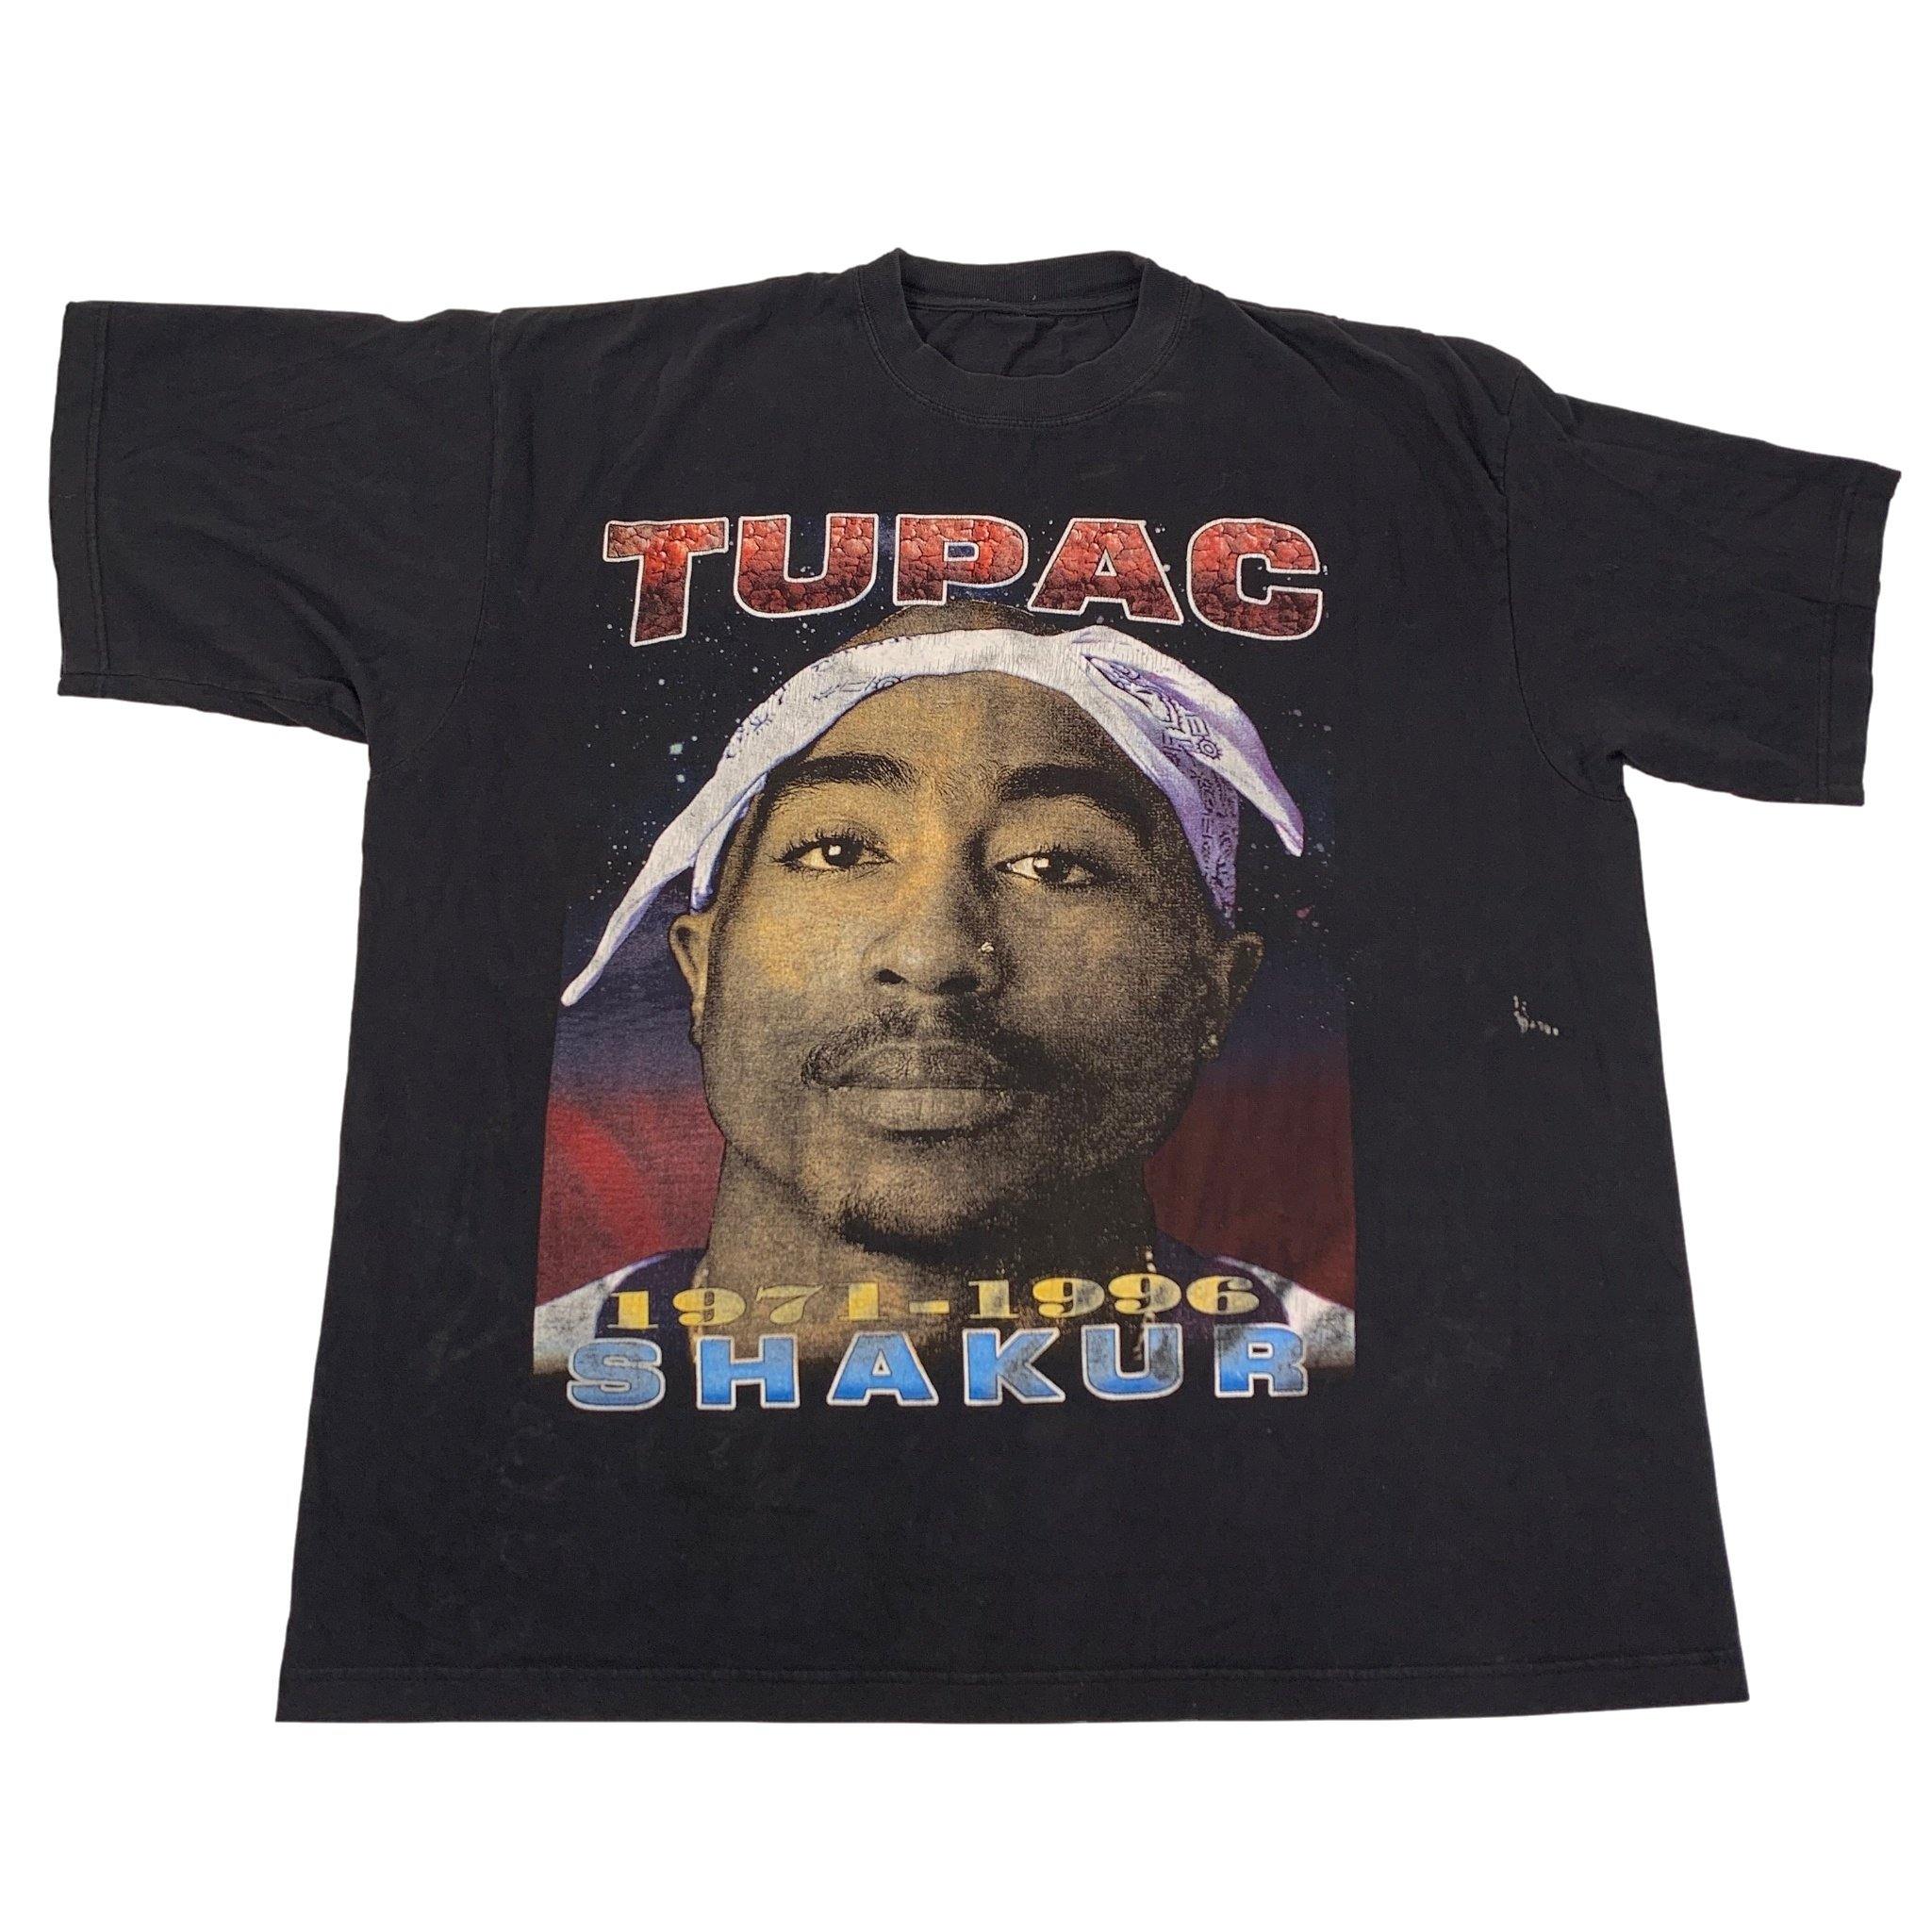 2PAC AGAINST ALL ODDS T SHIRTS5万なら取引できますよ